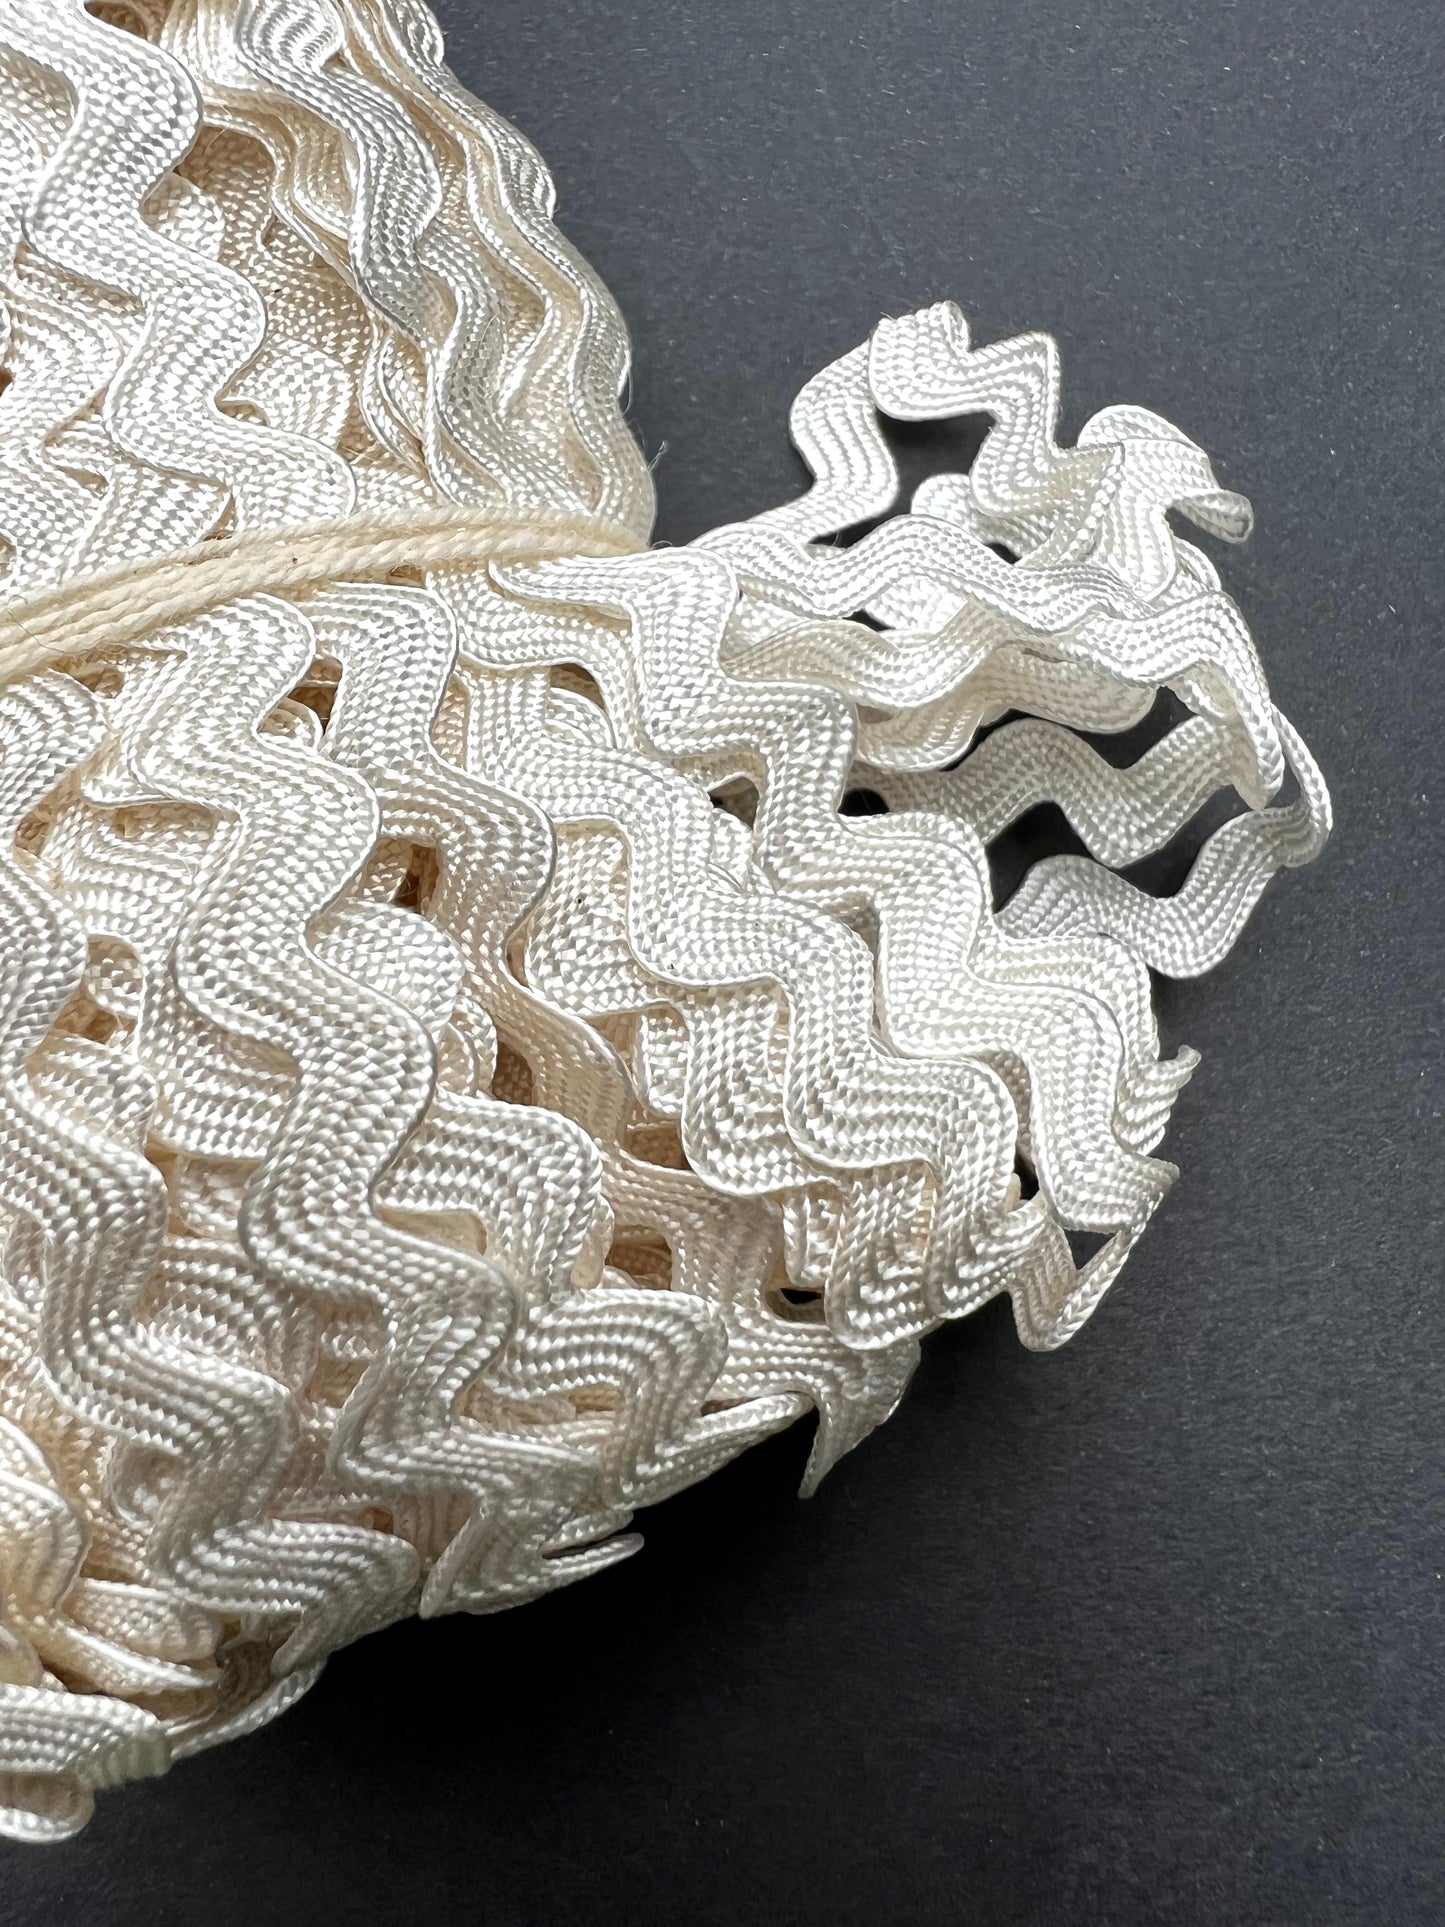 36 yds Vintage White 5mm Ric Rac Made in Poland